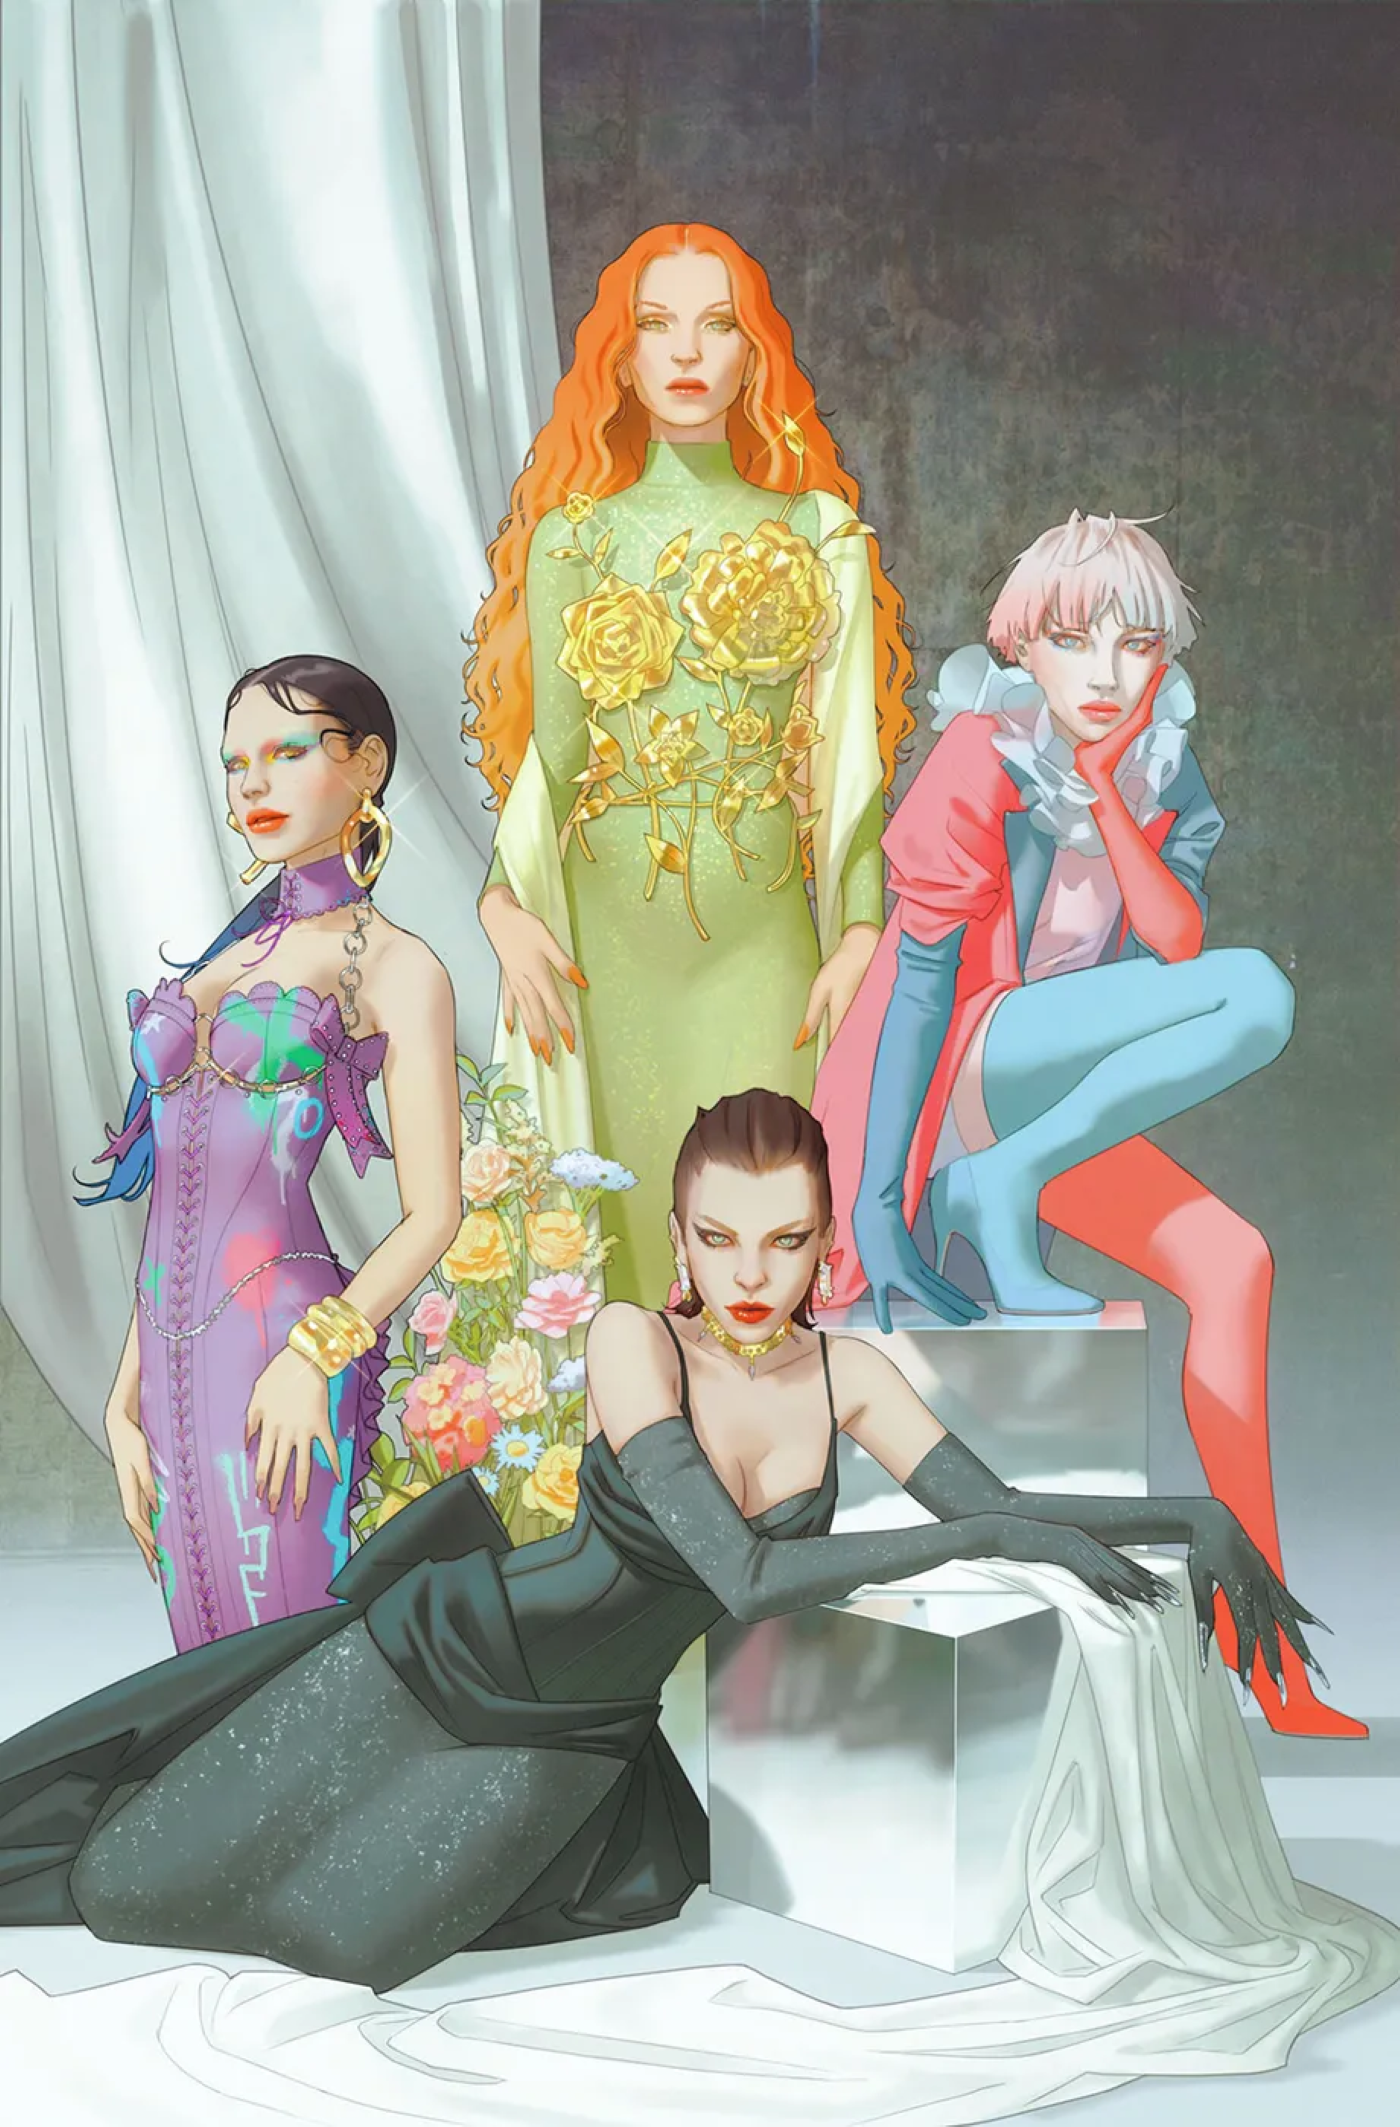 VARIANT COVERS BY W. SCOTT FORBES Gotham City Sirens Harley Quinn Poison Ivy Catwoman Punchline